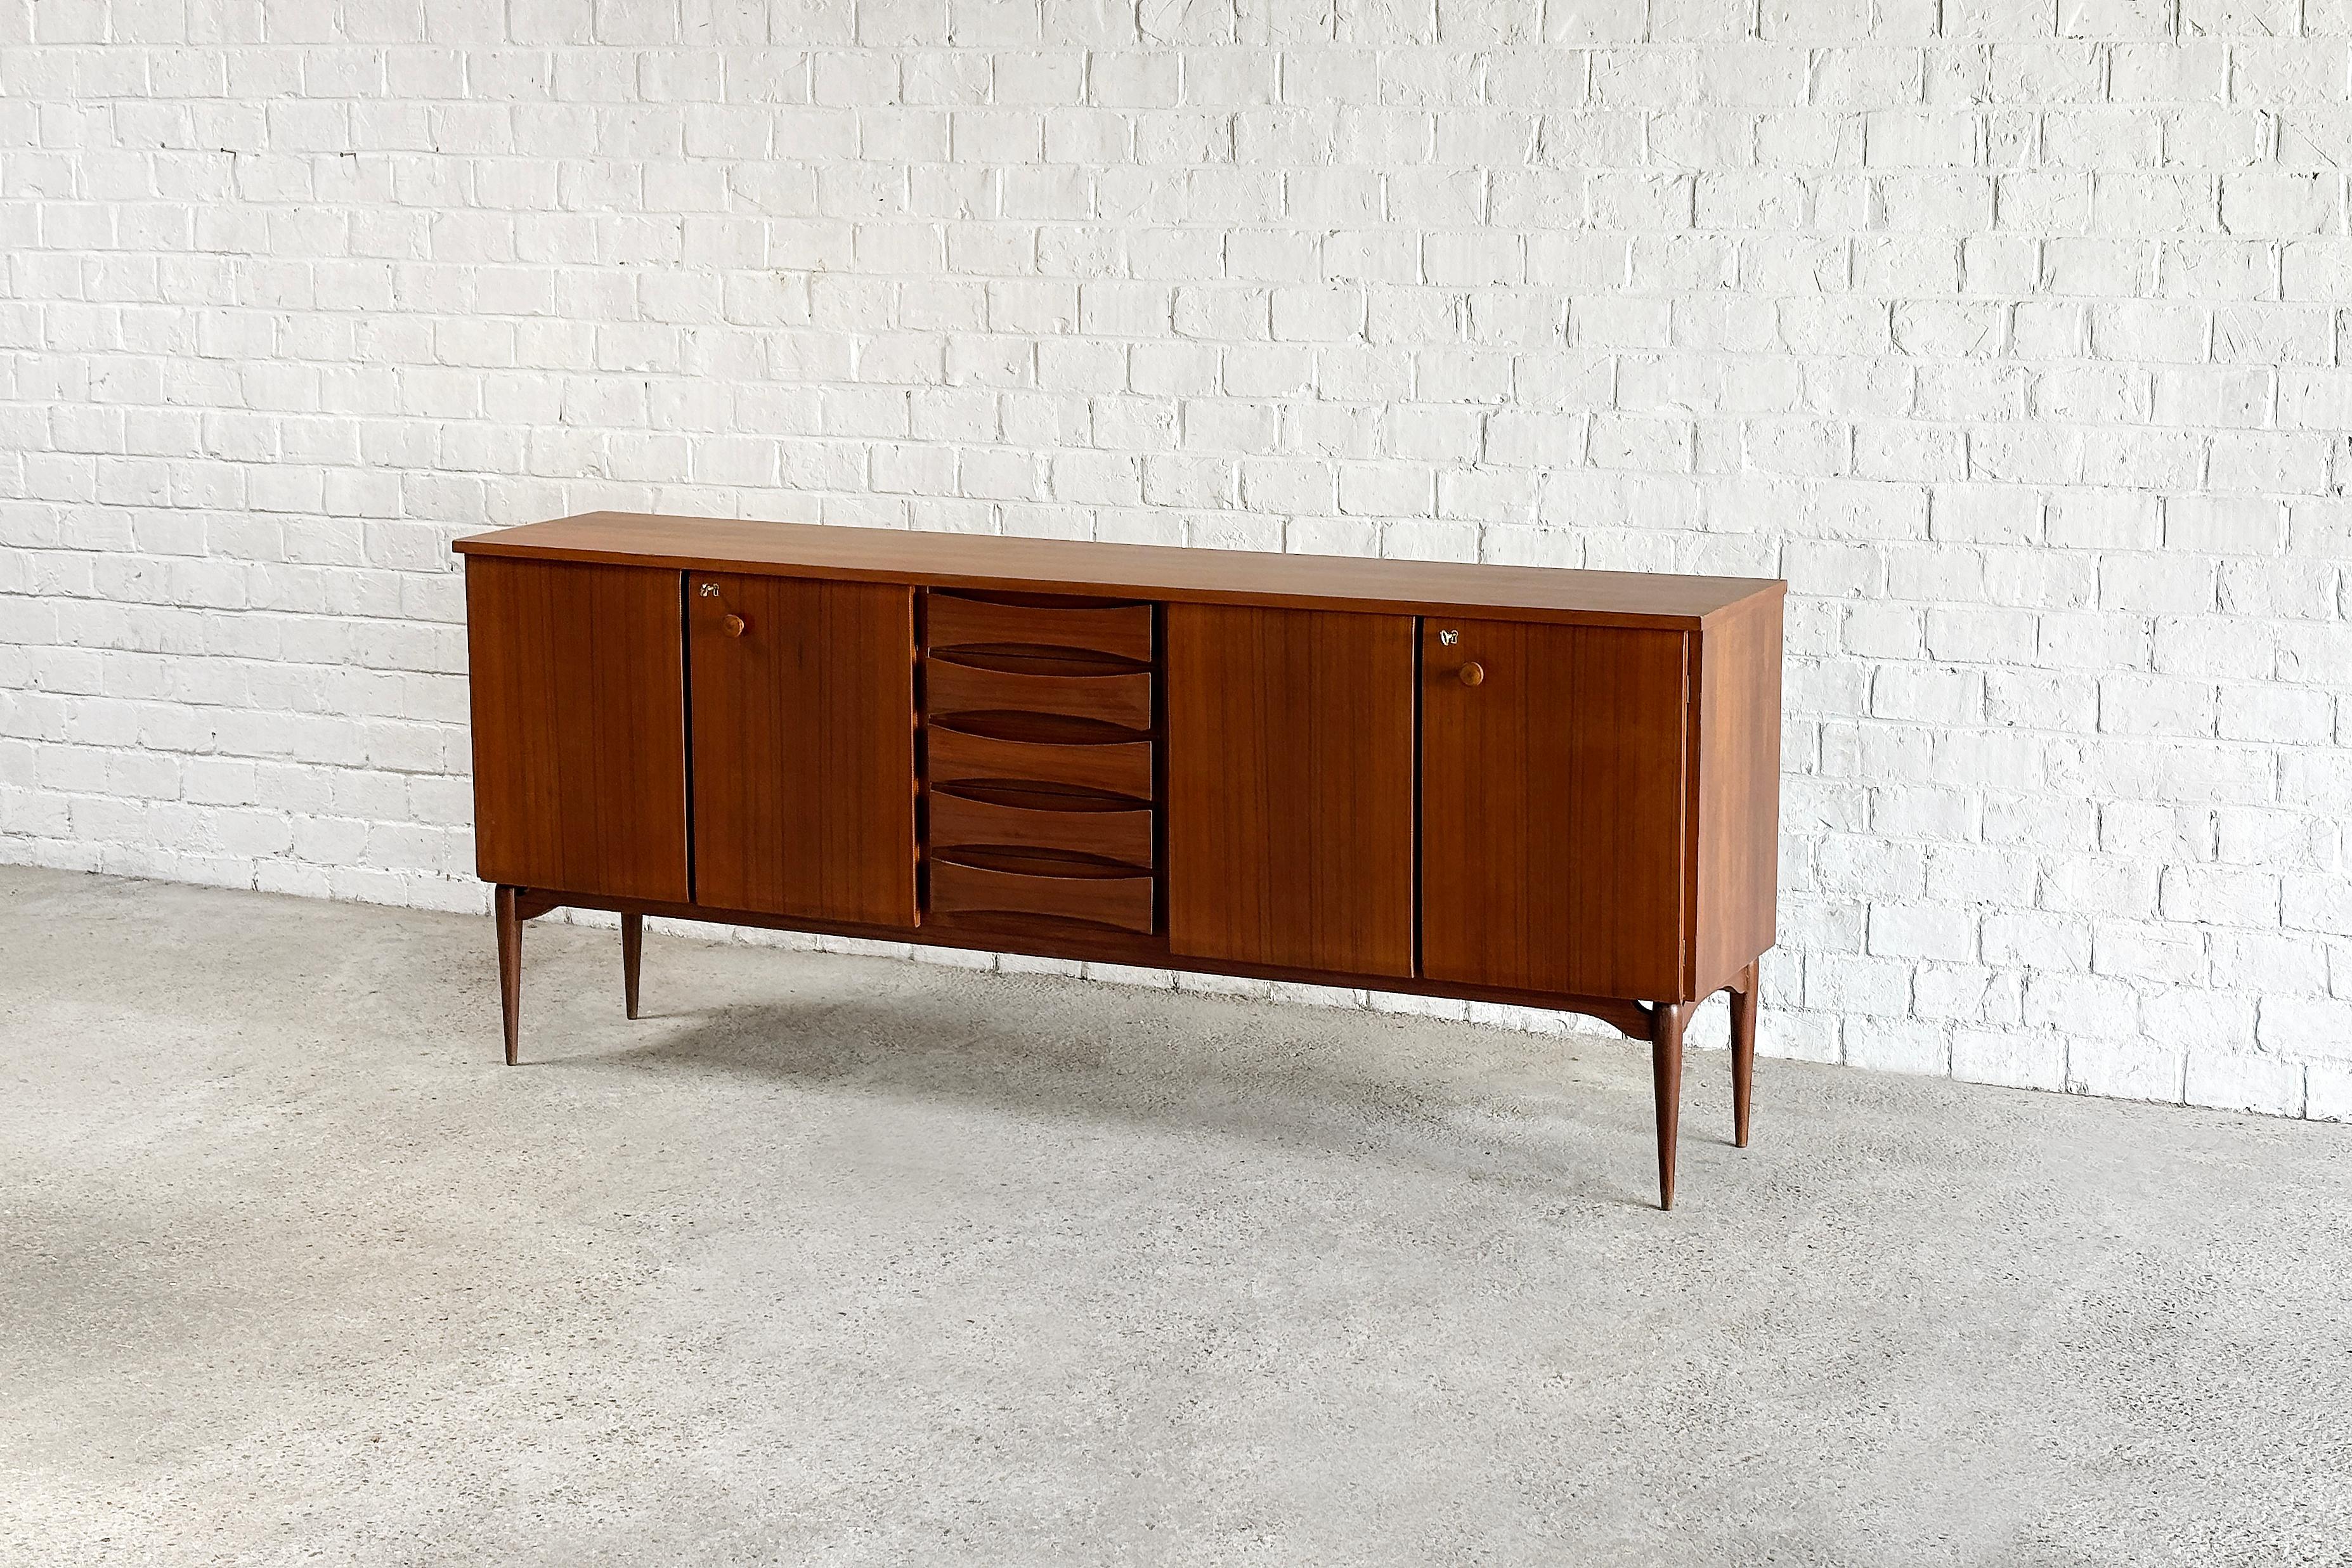 Beautifully constructed Italian modernist sideboard, designed and produced in 1960s. This piece is attributed to Vittorio Dassi. Crafted from fine grain teak showcasing beautiful warm tones and rich colours throughout typical for Italian modernist